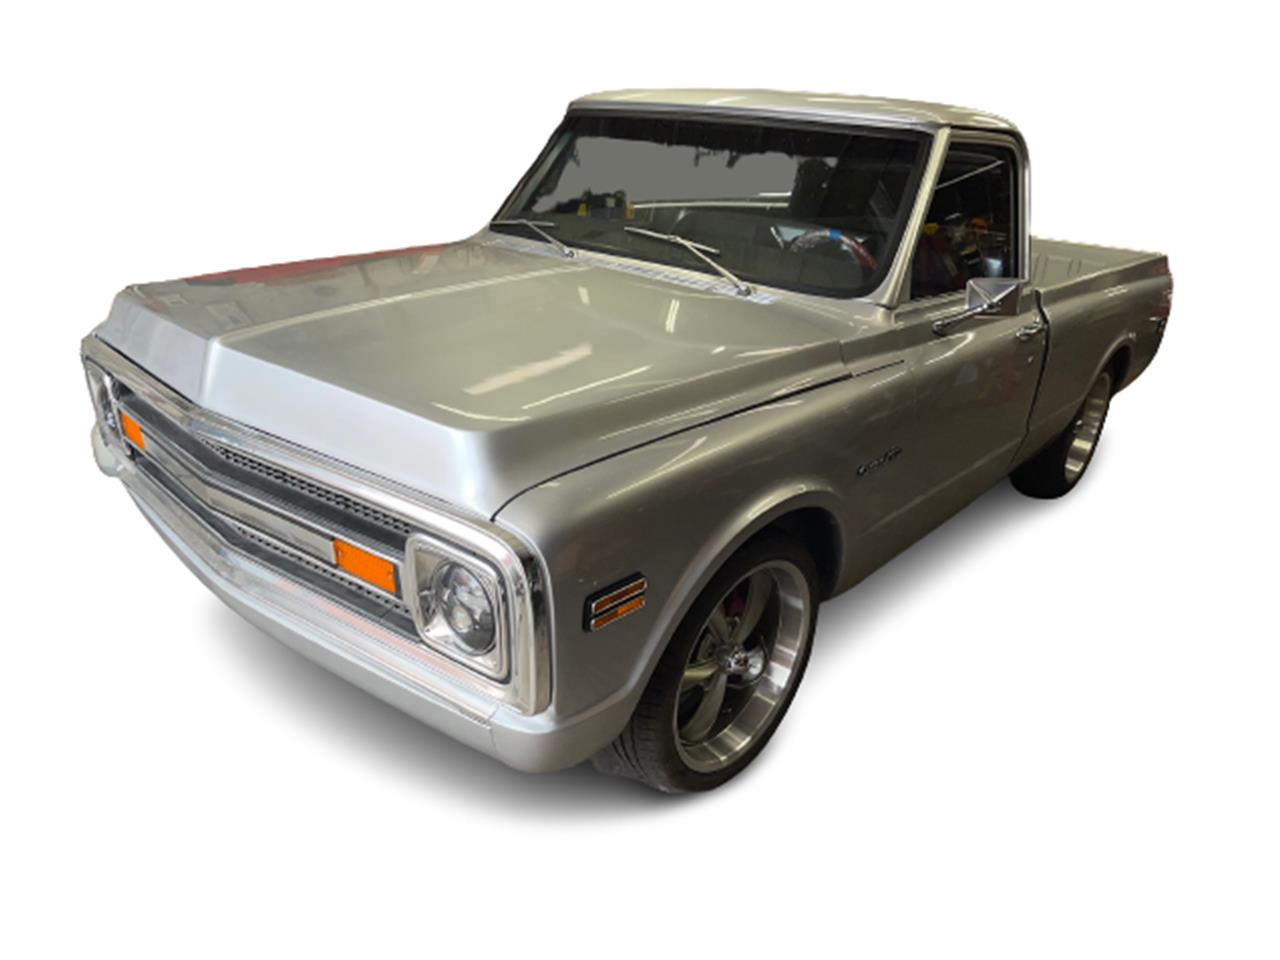 For Sale at Auction: 1971 Chevrolet C10 in Greensboro, North Carolina for sale in Greensboro, NC